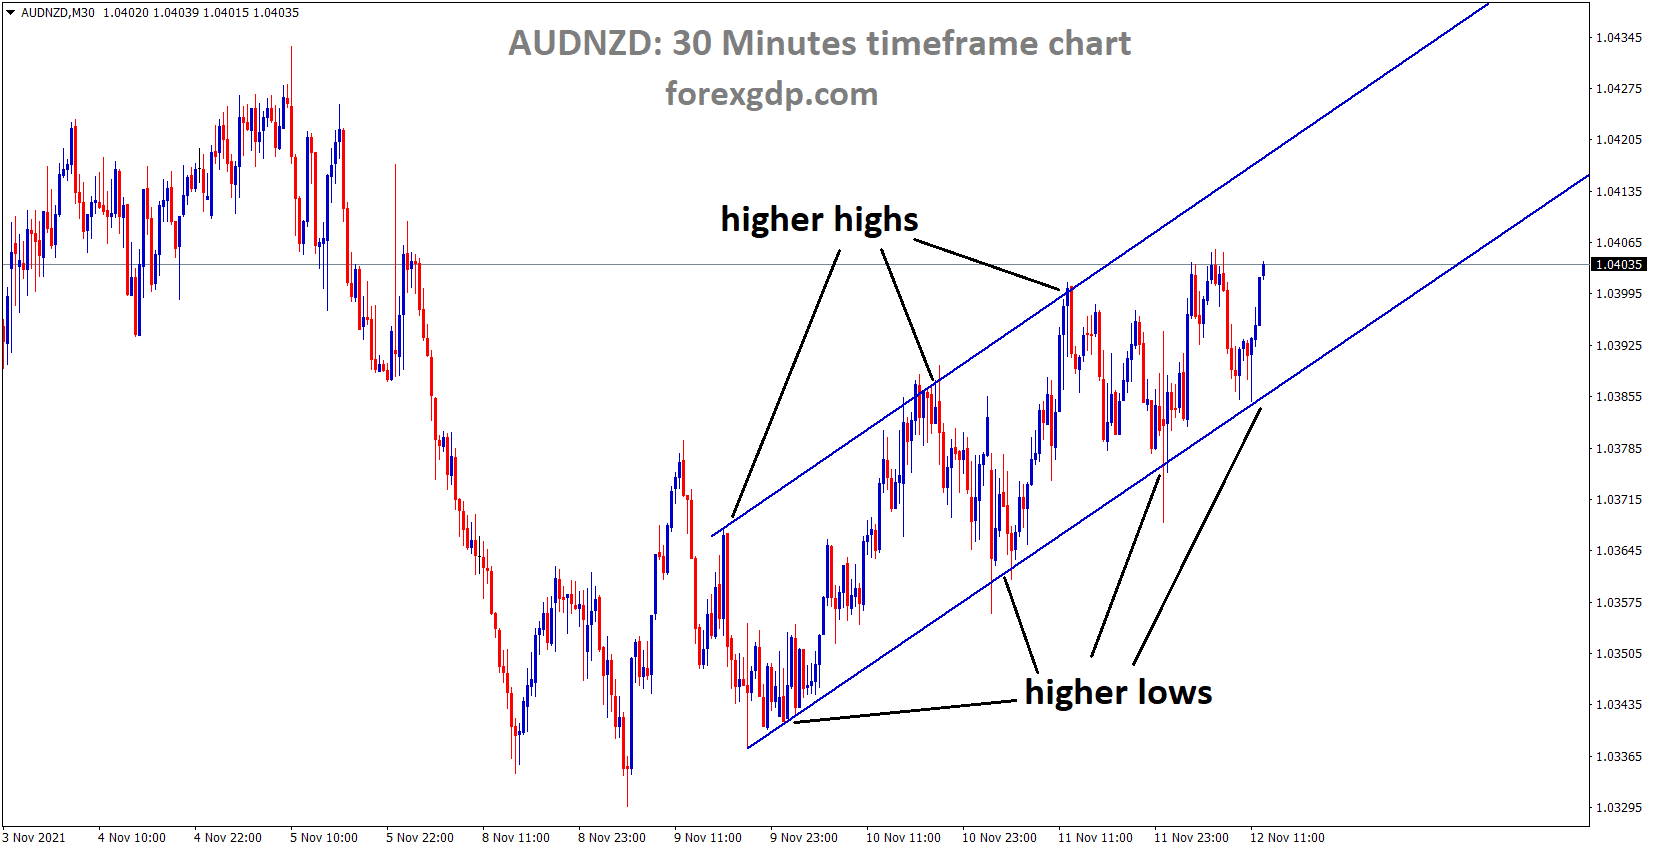 AUDNZD is moving in an Ascending channel and the market is rebounded from the Higher low area